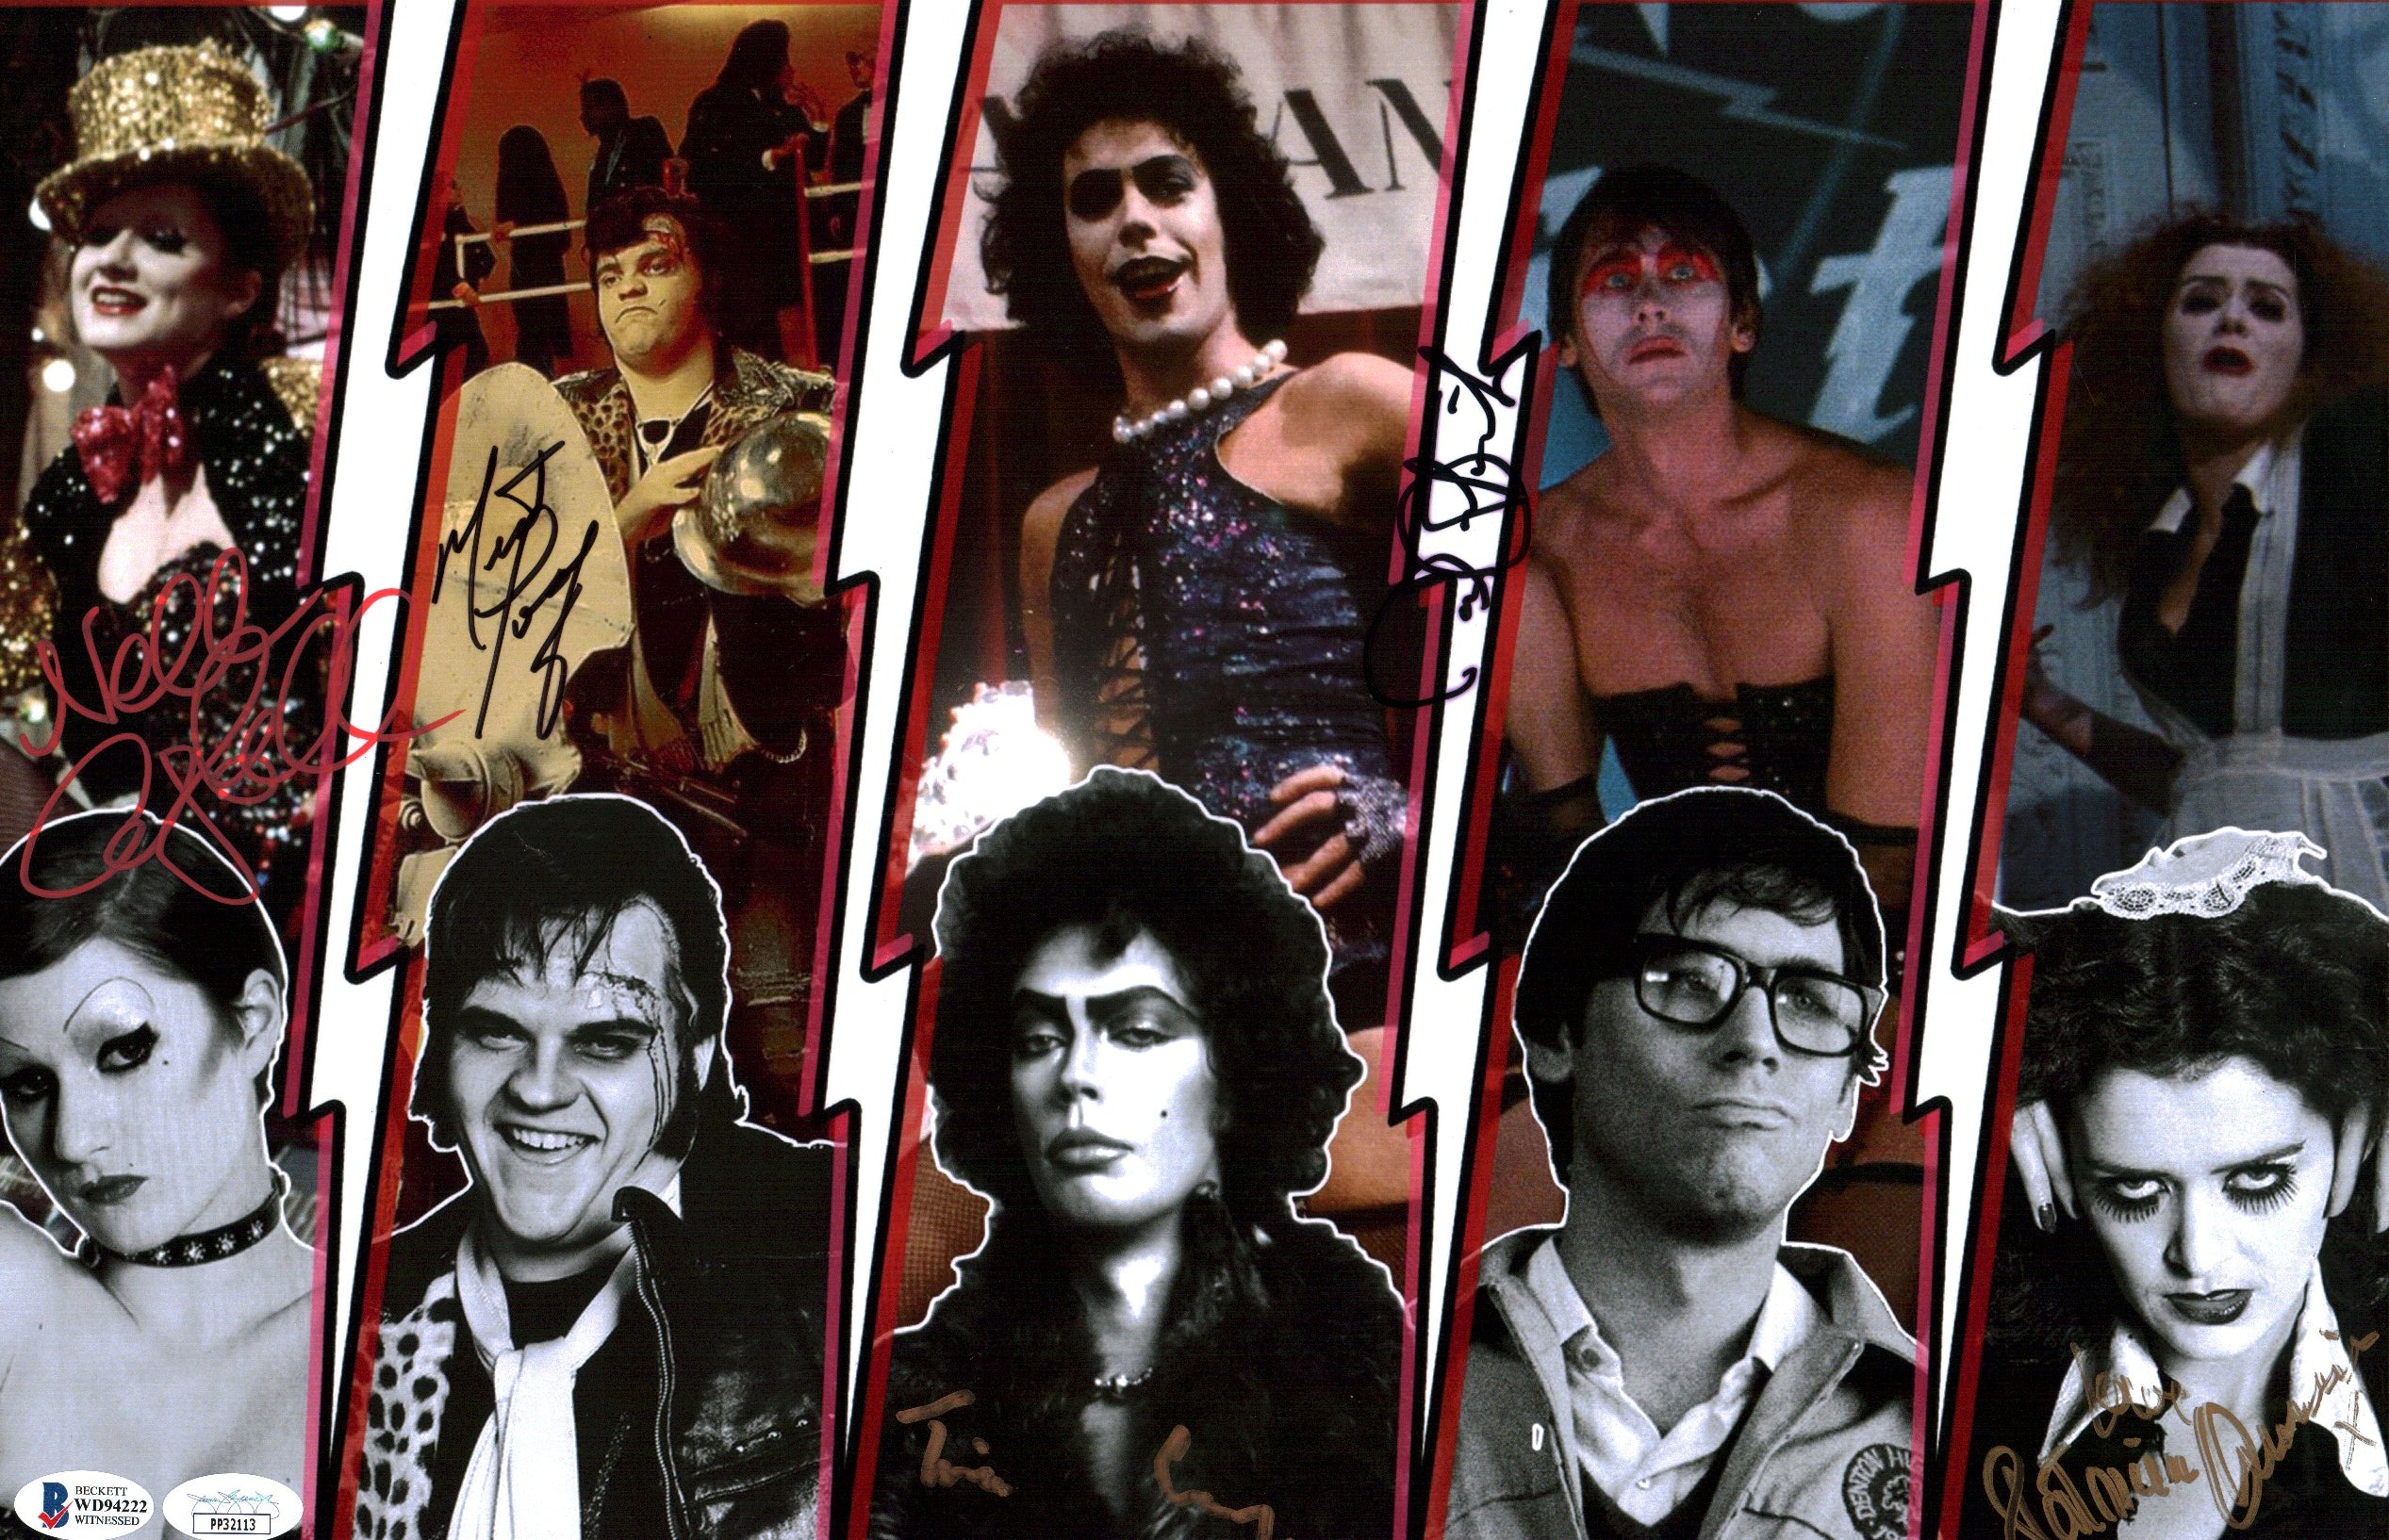 The Rocky Horror Picture Show 11x17 Mini Poster Cast x5 Signed Bostwick Campbell Curry Quinn Meatloaf JSA Beckett Certified Autograph GalaxyCon